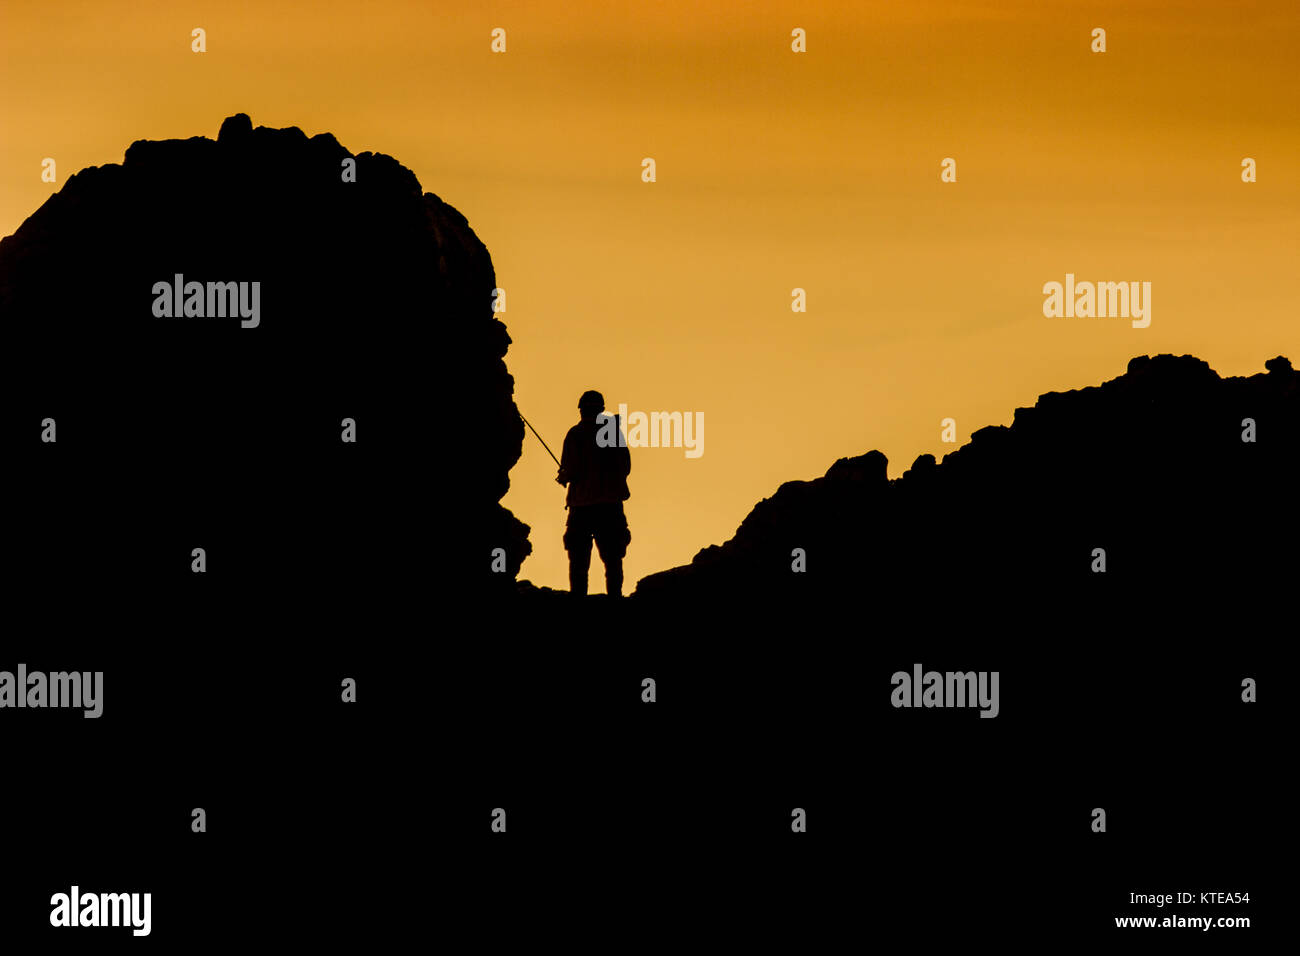 Silhouette of fisherman standing on a rock formation at sunset from Little Corona Beach, Corona Del Mar, California Stock Photo